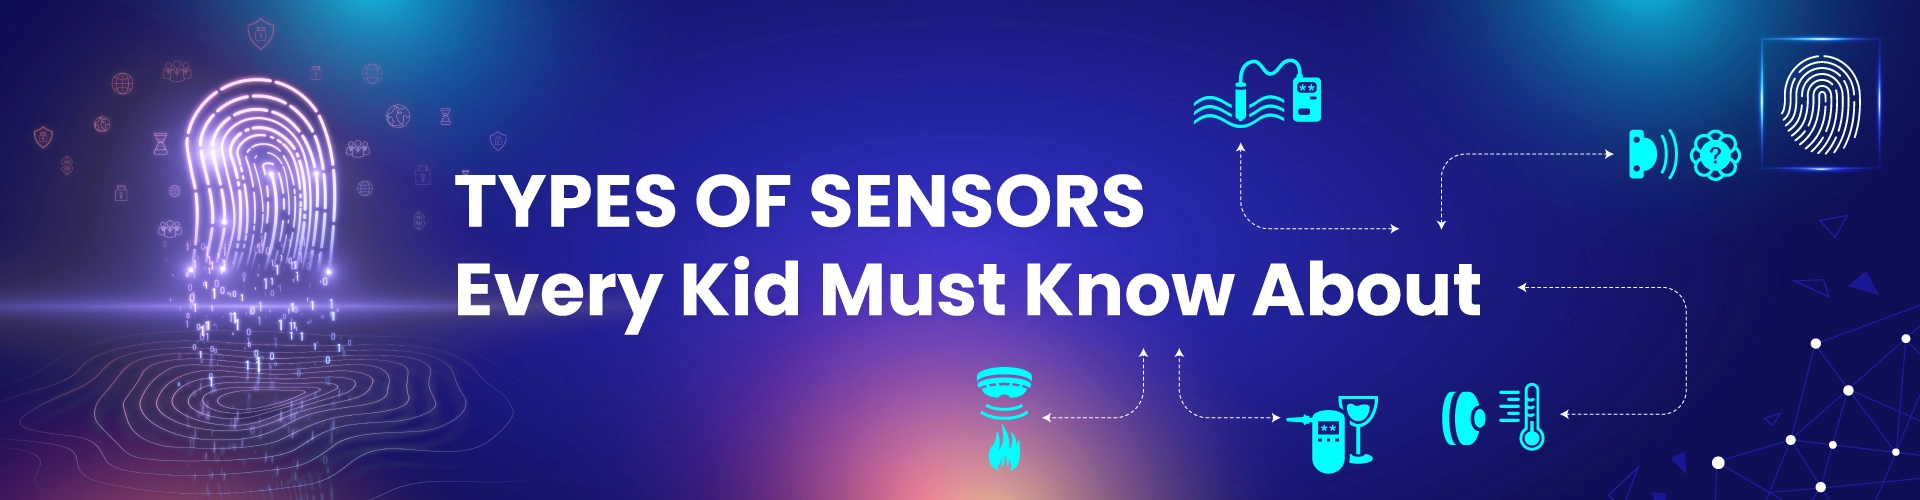 Types of Sensors Every Kid Must Know About